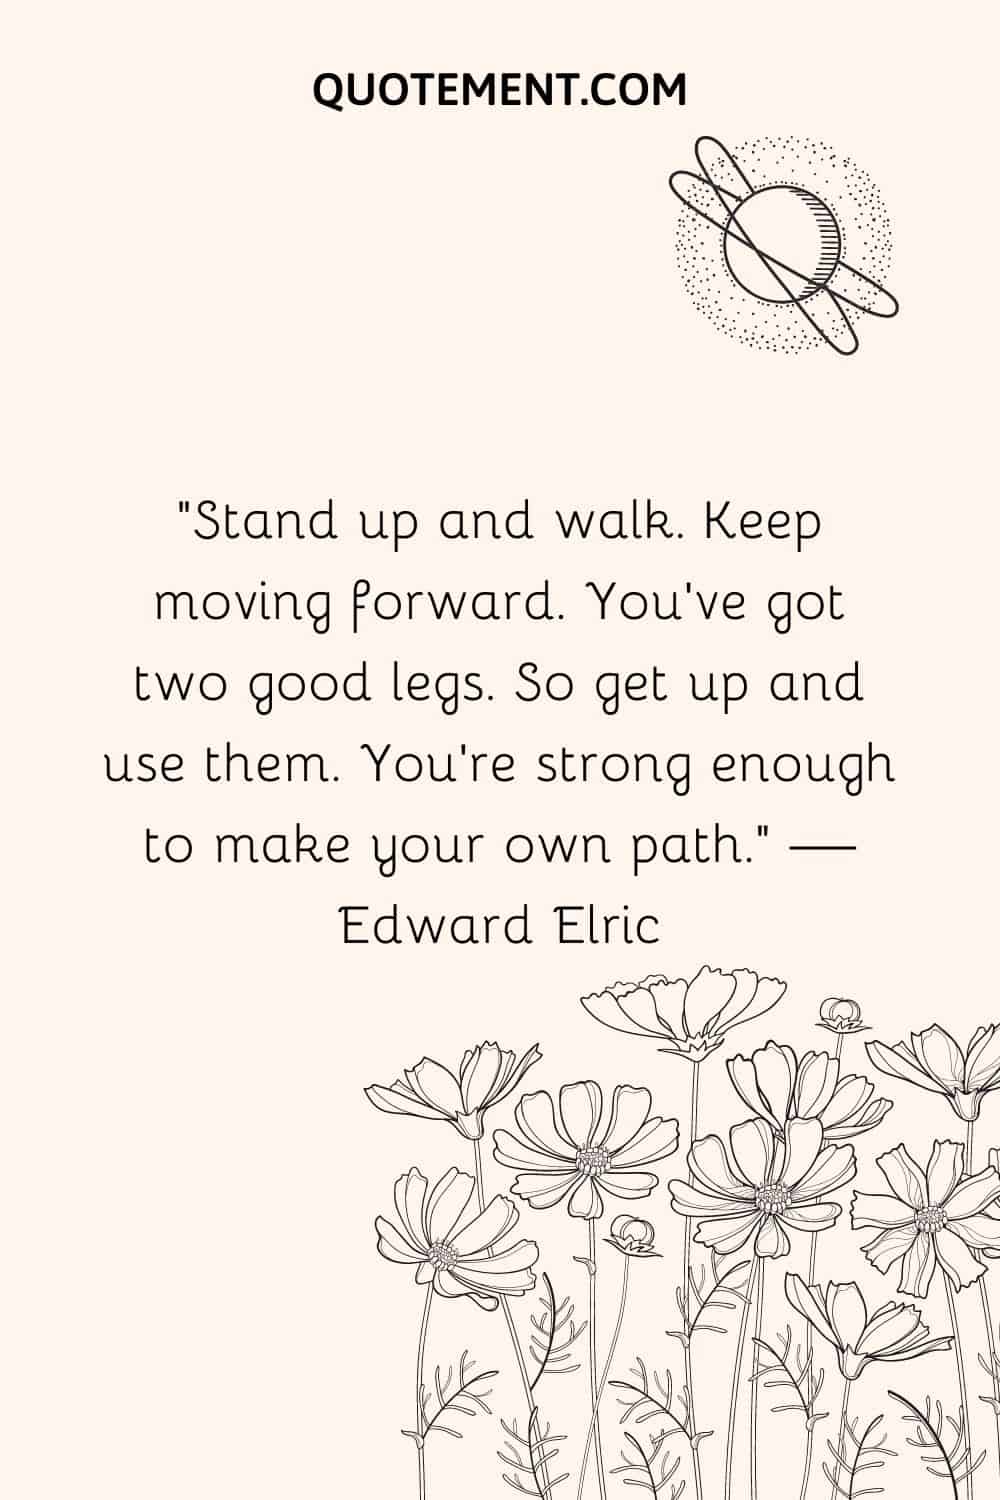 Stand up and walk. Keep moving forward